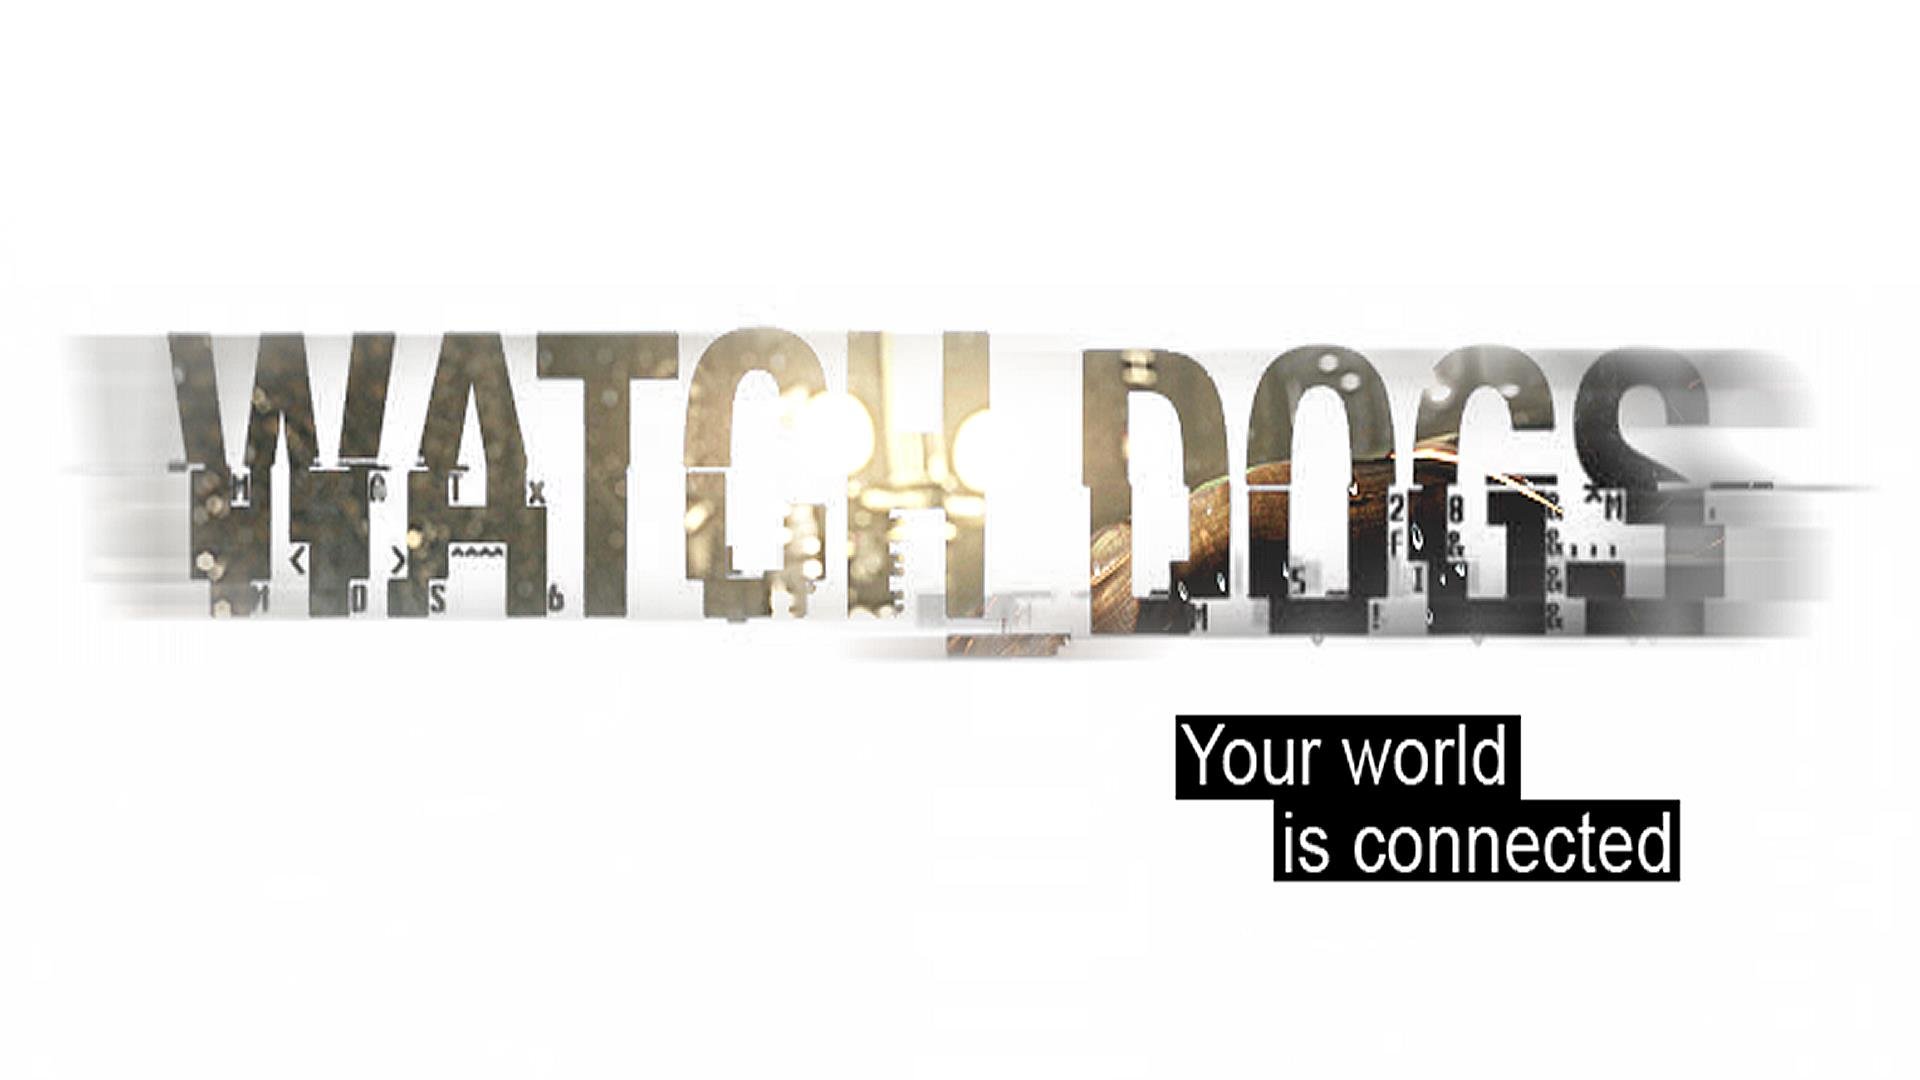 High resolution Watch Dogs hd 1920x1080 background ID:117272 for desktop